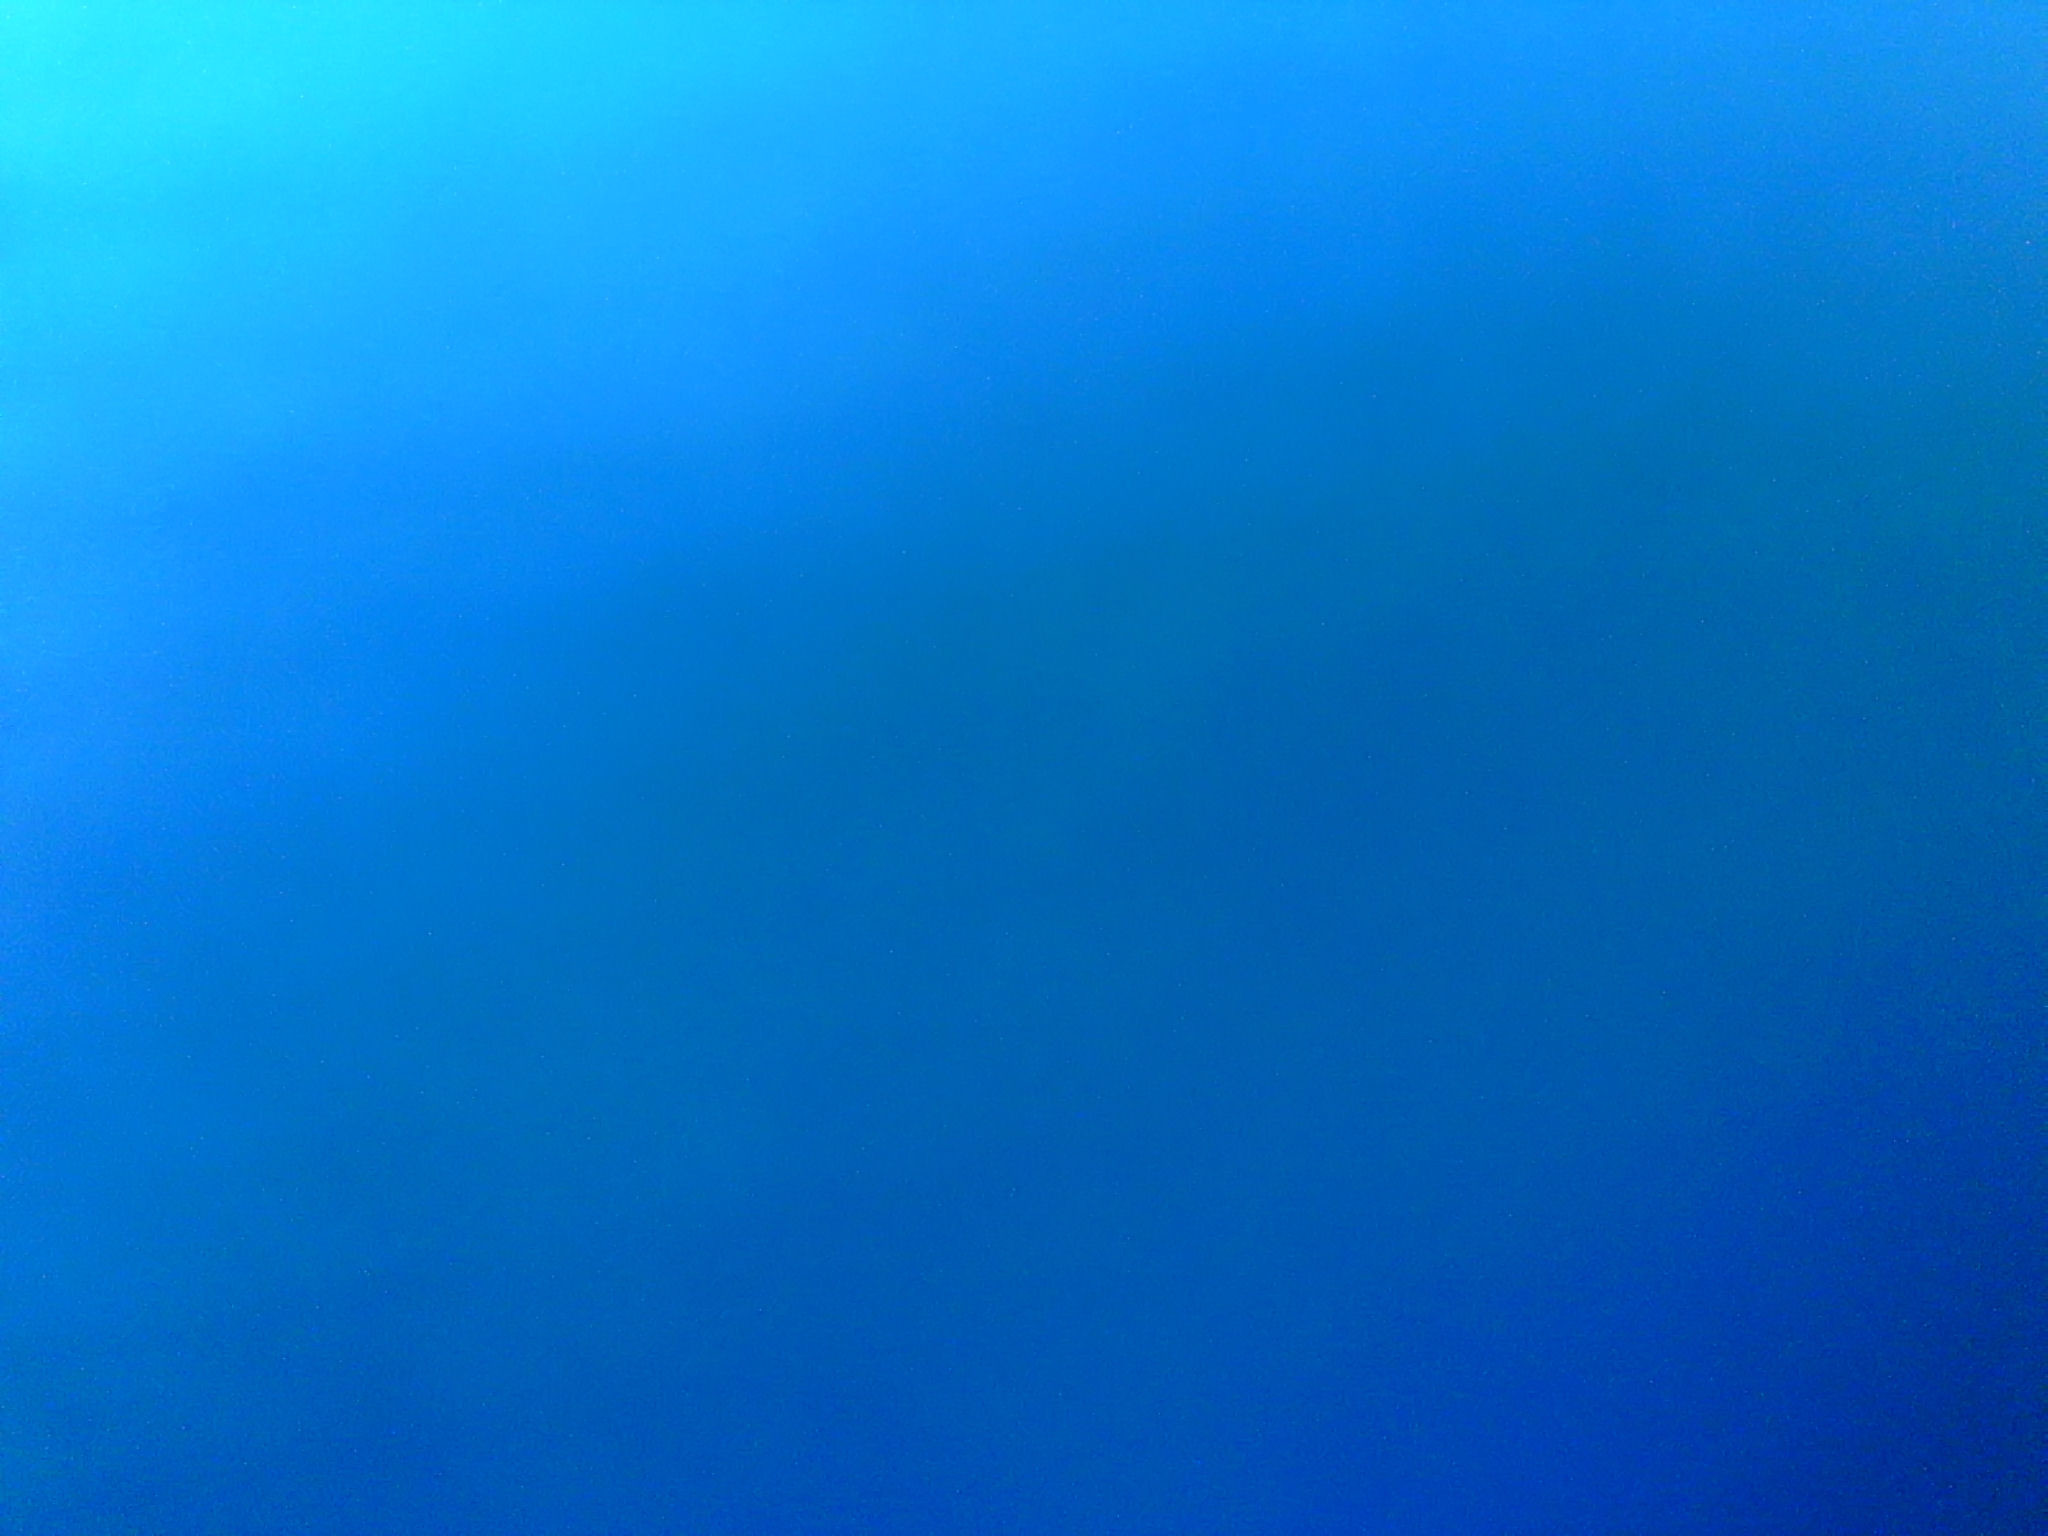 2048x1536 Bsod Wallpaper 1920x1200 Related Keywords & Suggestions .